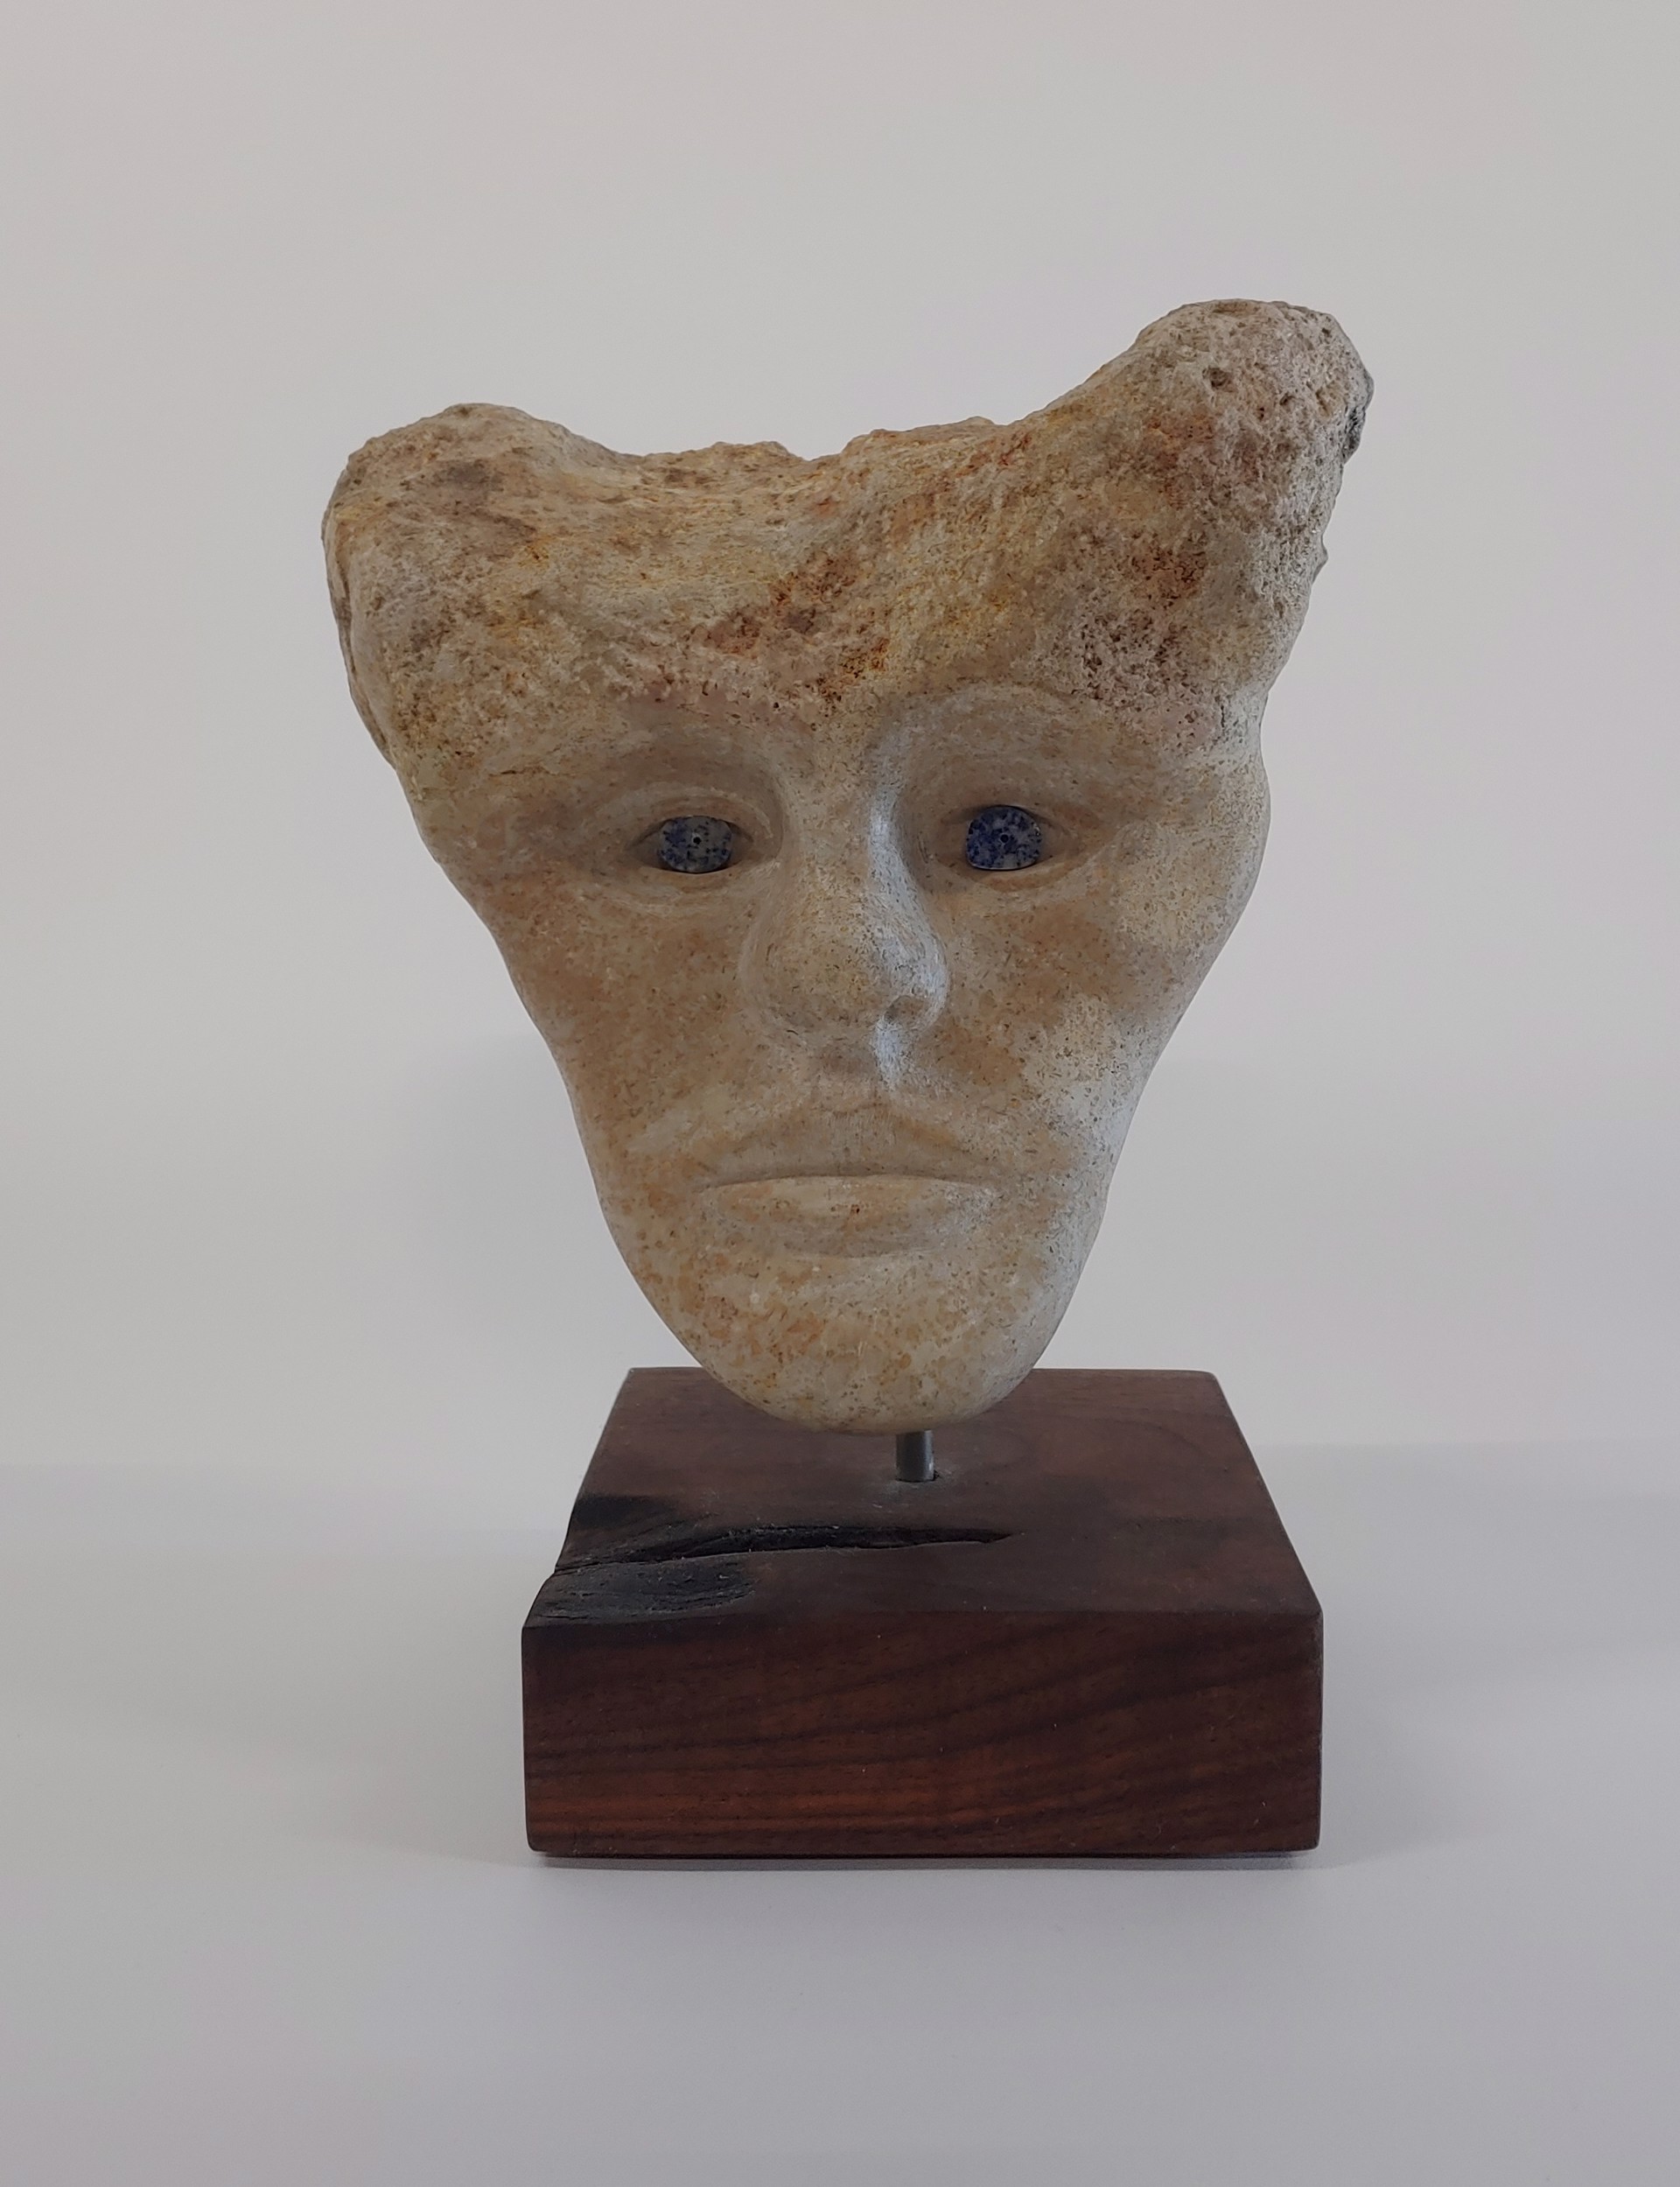 Stone Head with Abalone Eyes - Stone Sculpture by David Amdur